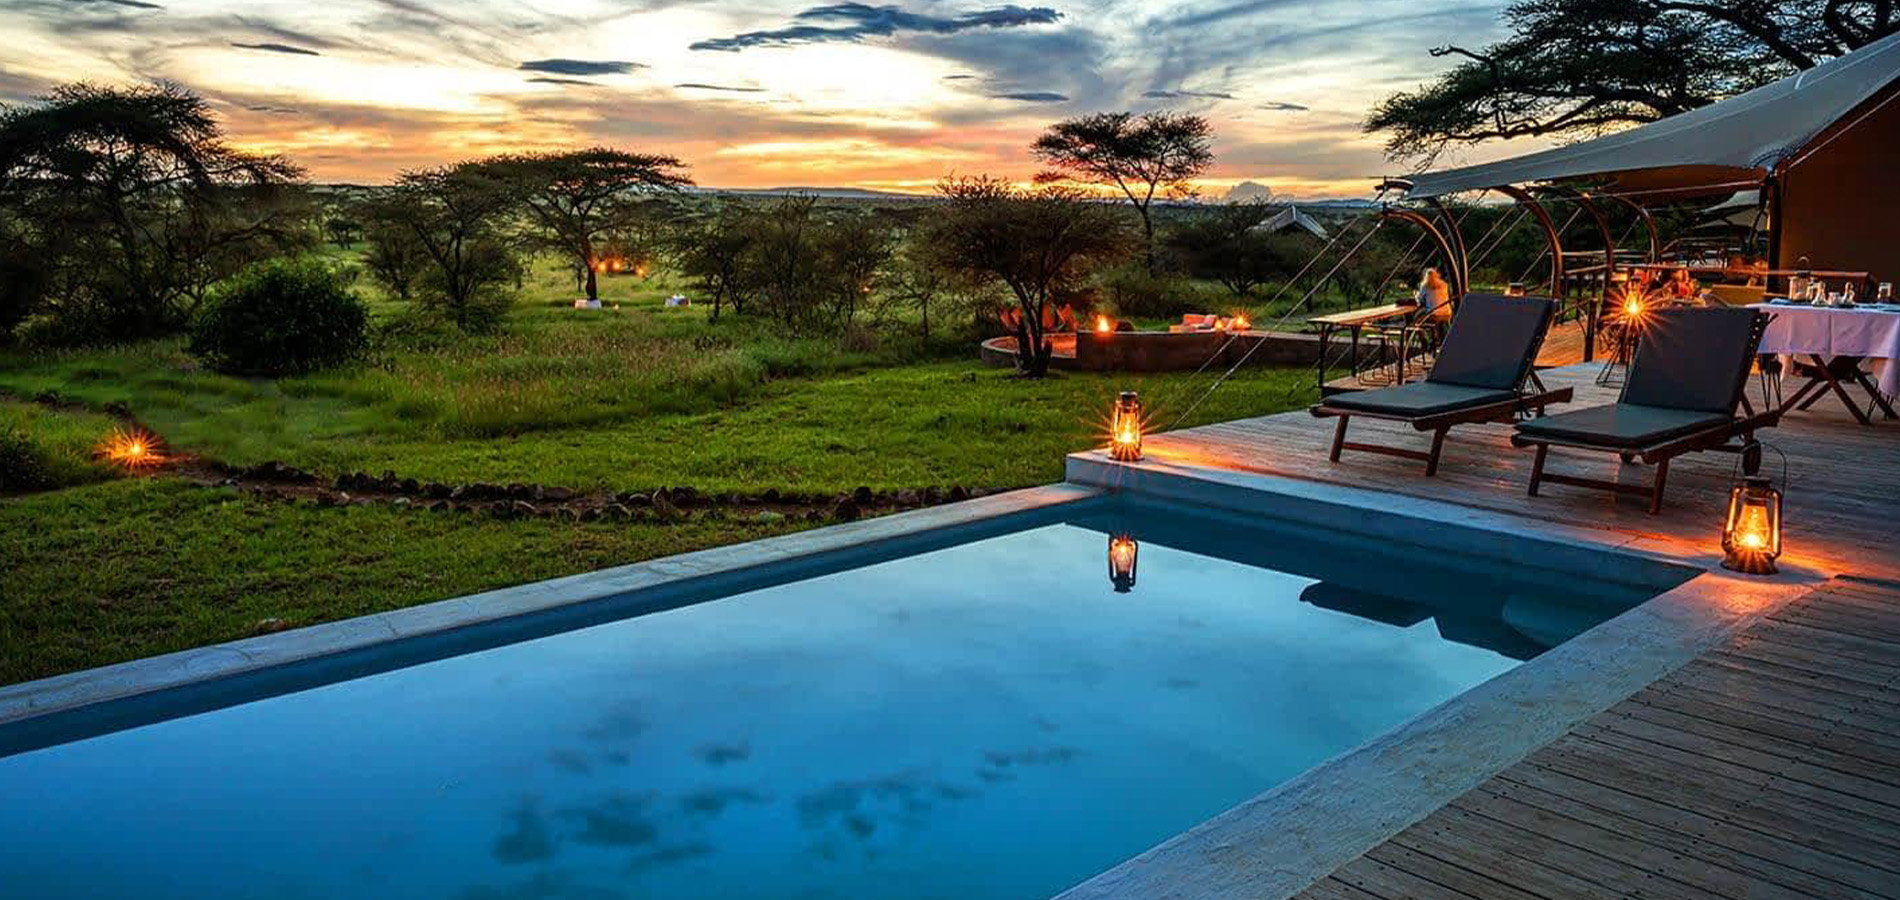 Lemala Nanyukie Serengeti Tanzania Luxury african safari Accommodation,One of the most luxurious safari lodge in tanzania is Lemala Nanyukie Serengeti While you might be in a remote location surrounded by undomesticated wildlife and untamed bushland, you still have a comfy king-sized bed and private plunge pool nearby the best way to enjoy an African safari Nature.